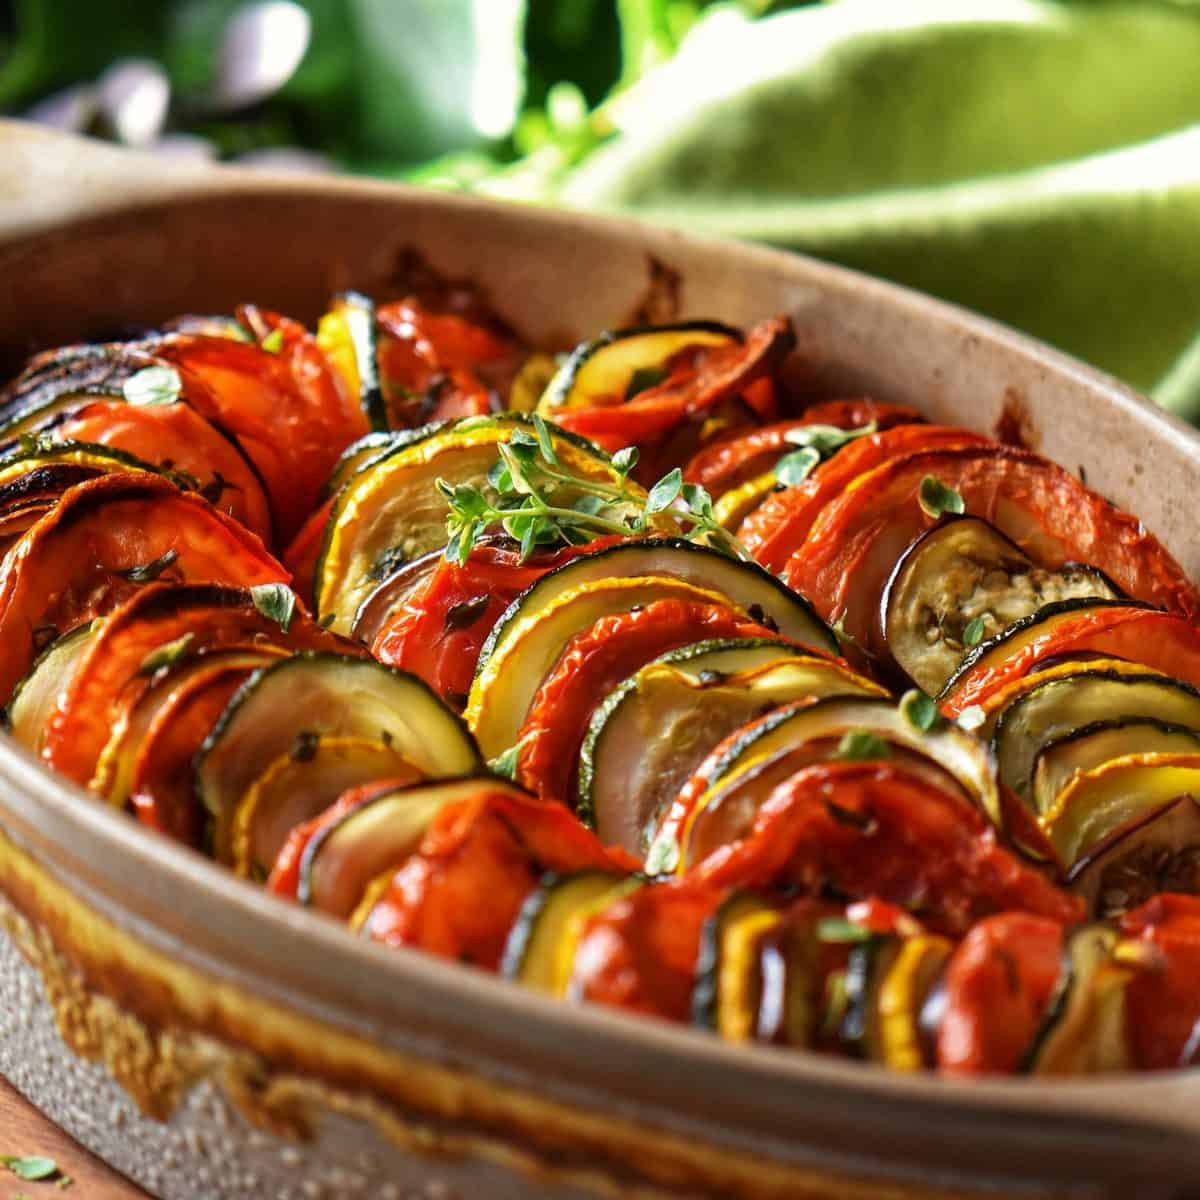 How to Cut and Roast Vegetables